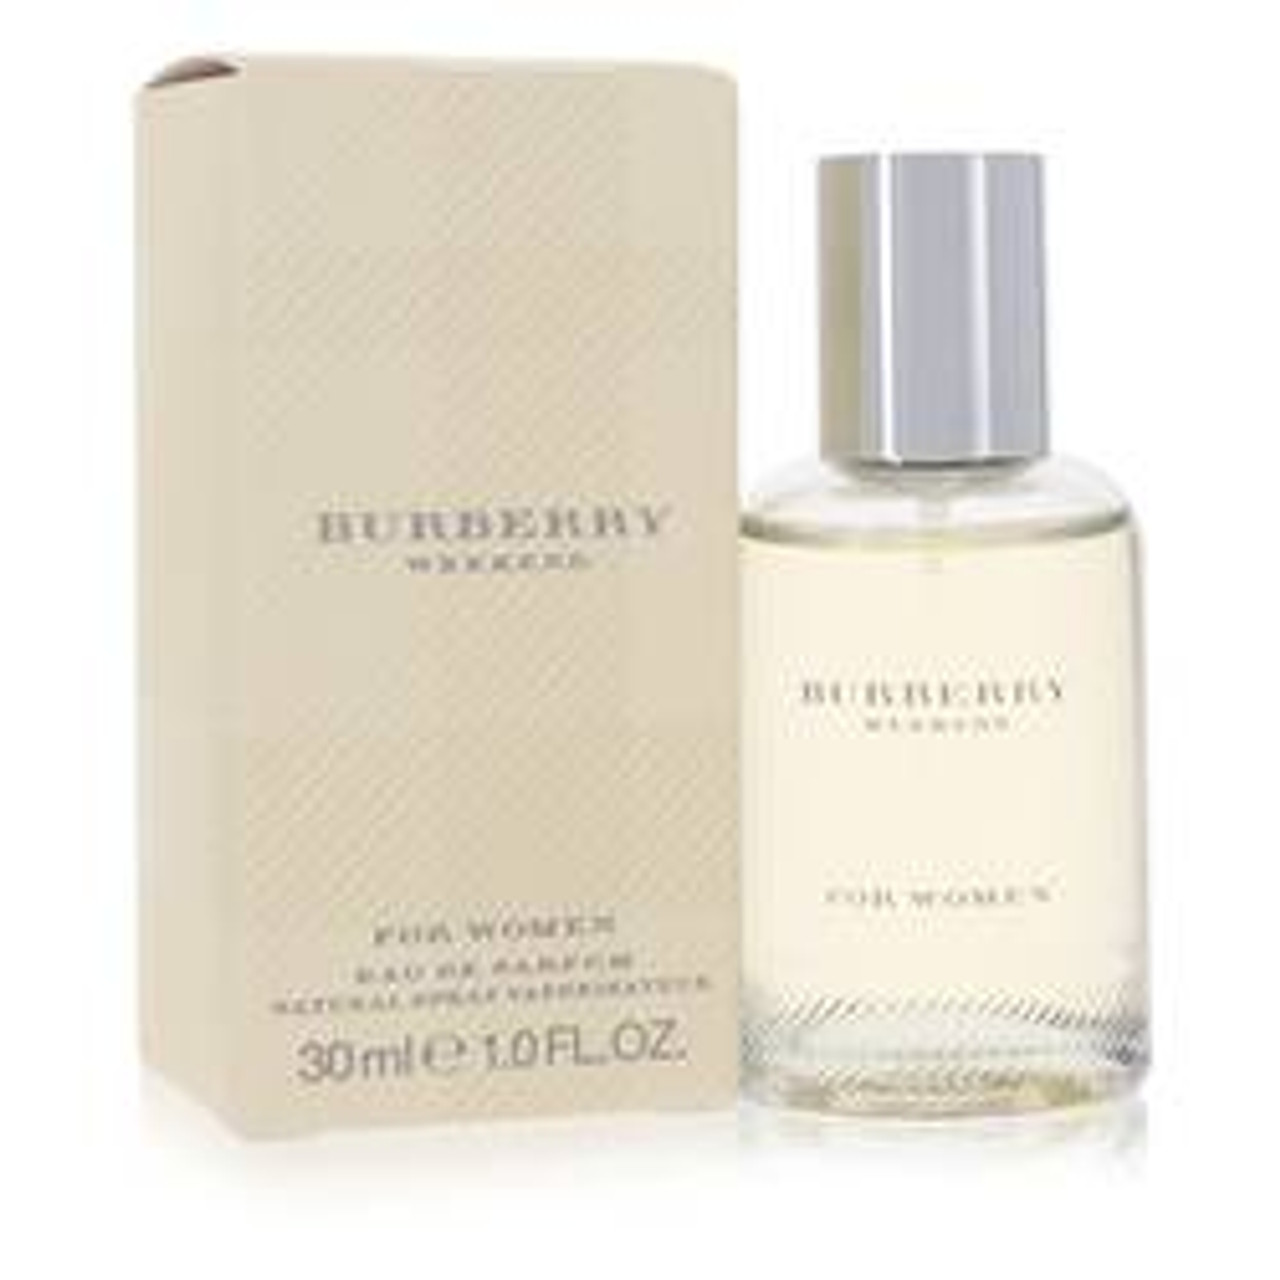 Weekend Perfume By Burberry Eau De Parfum Spray 1 oz for Women - [From 83.00 - Choose pk Qty ] - *Ships from Miami